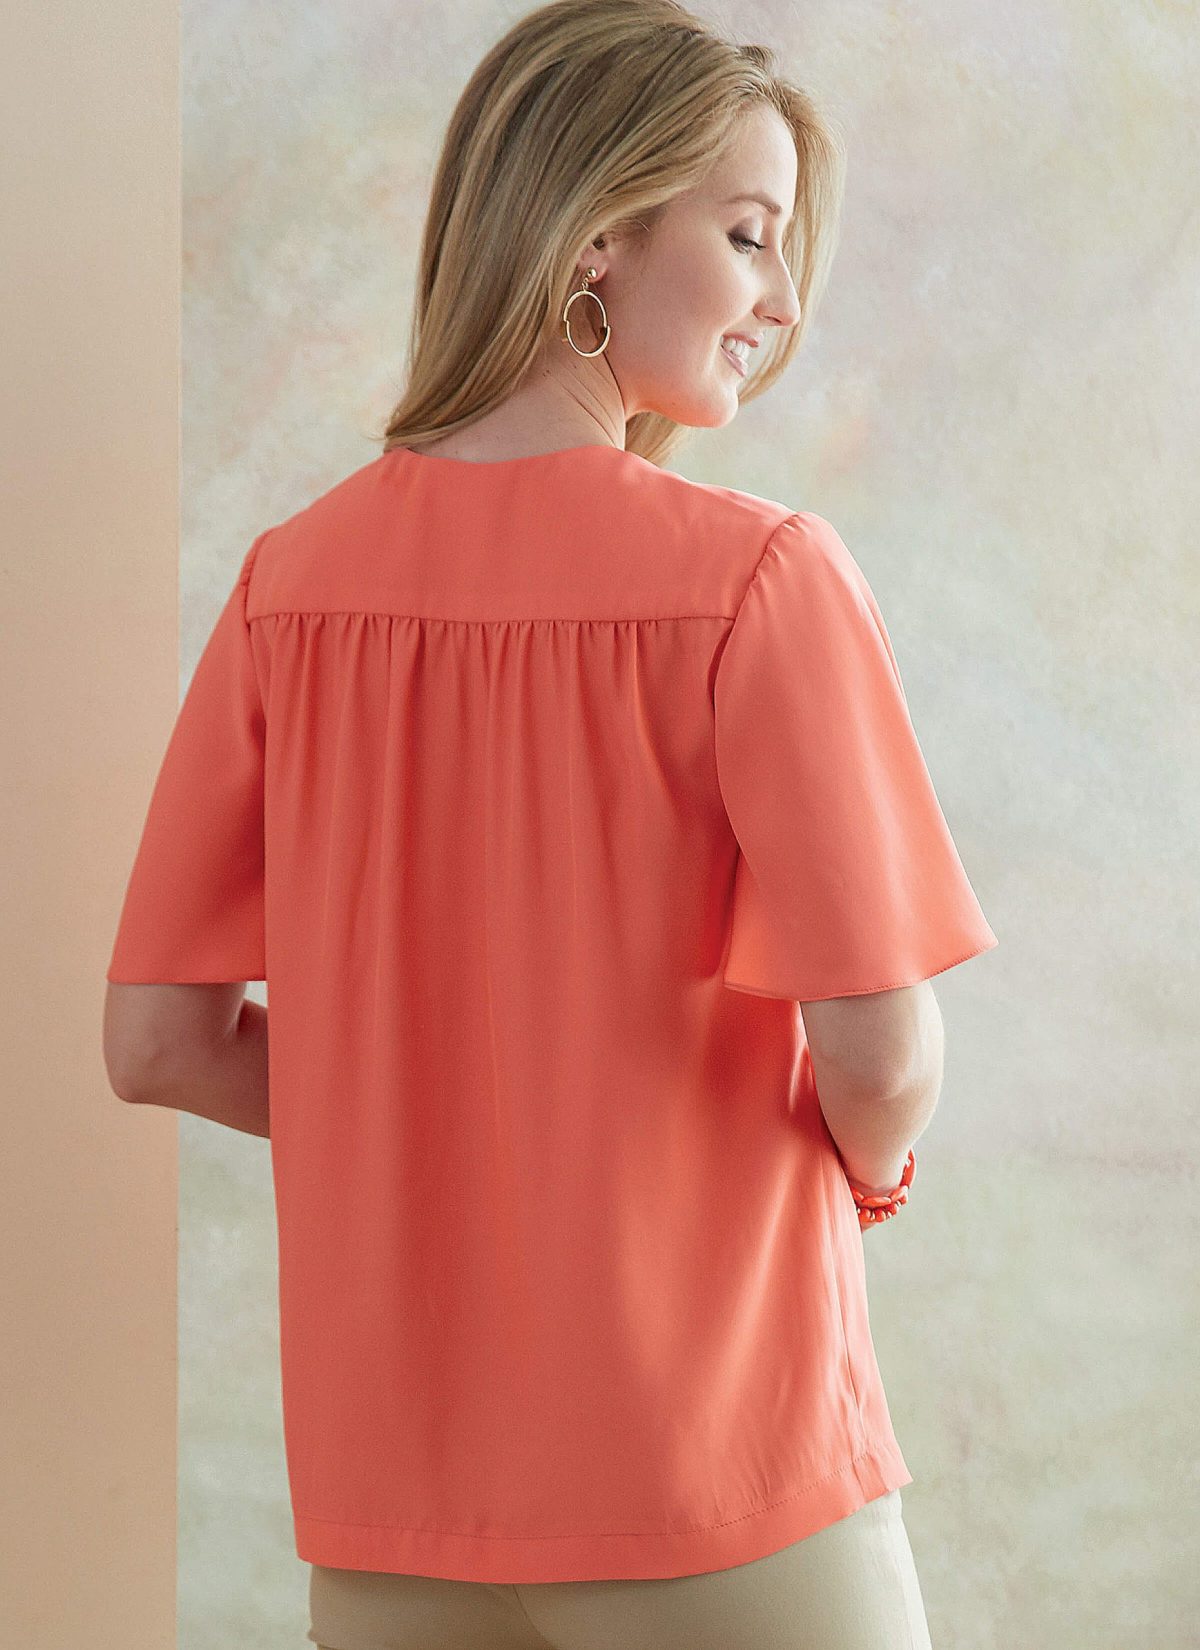 Butterick Sewing Pattern B6688 Misses' Top